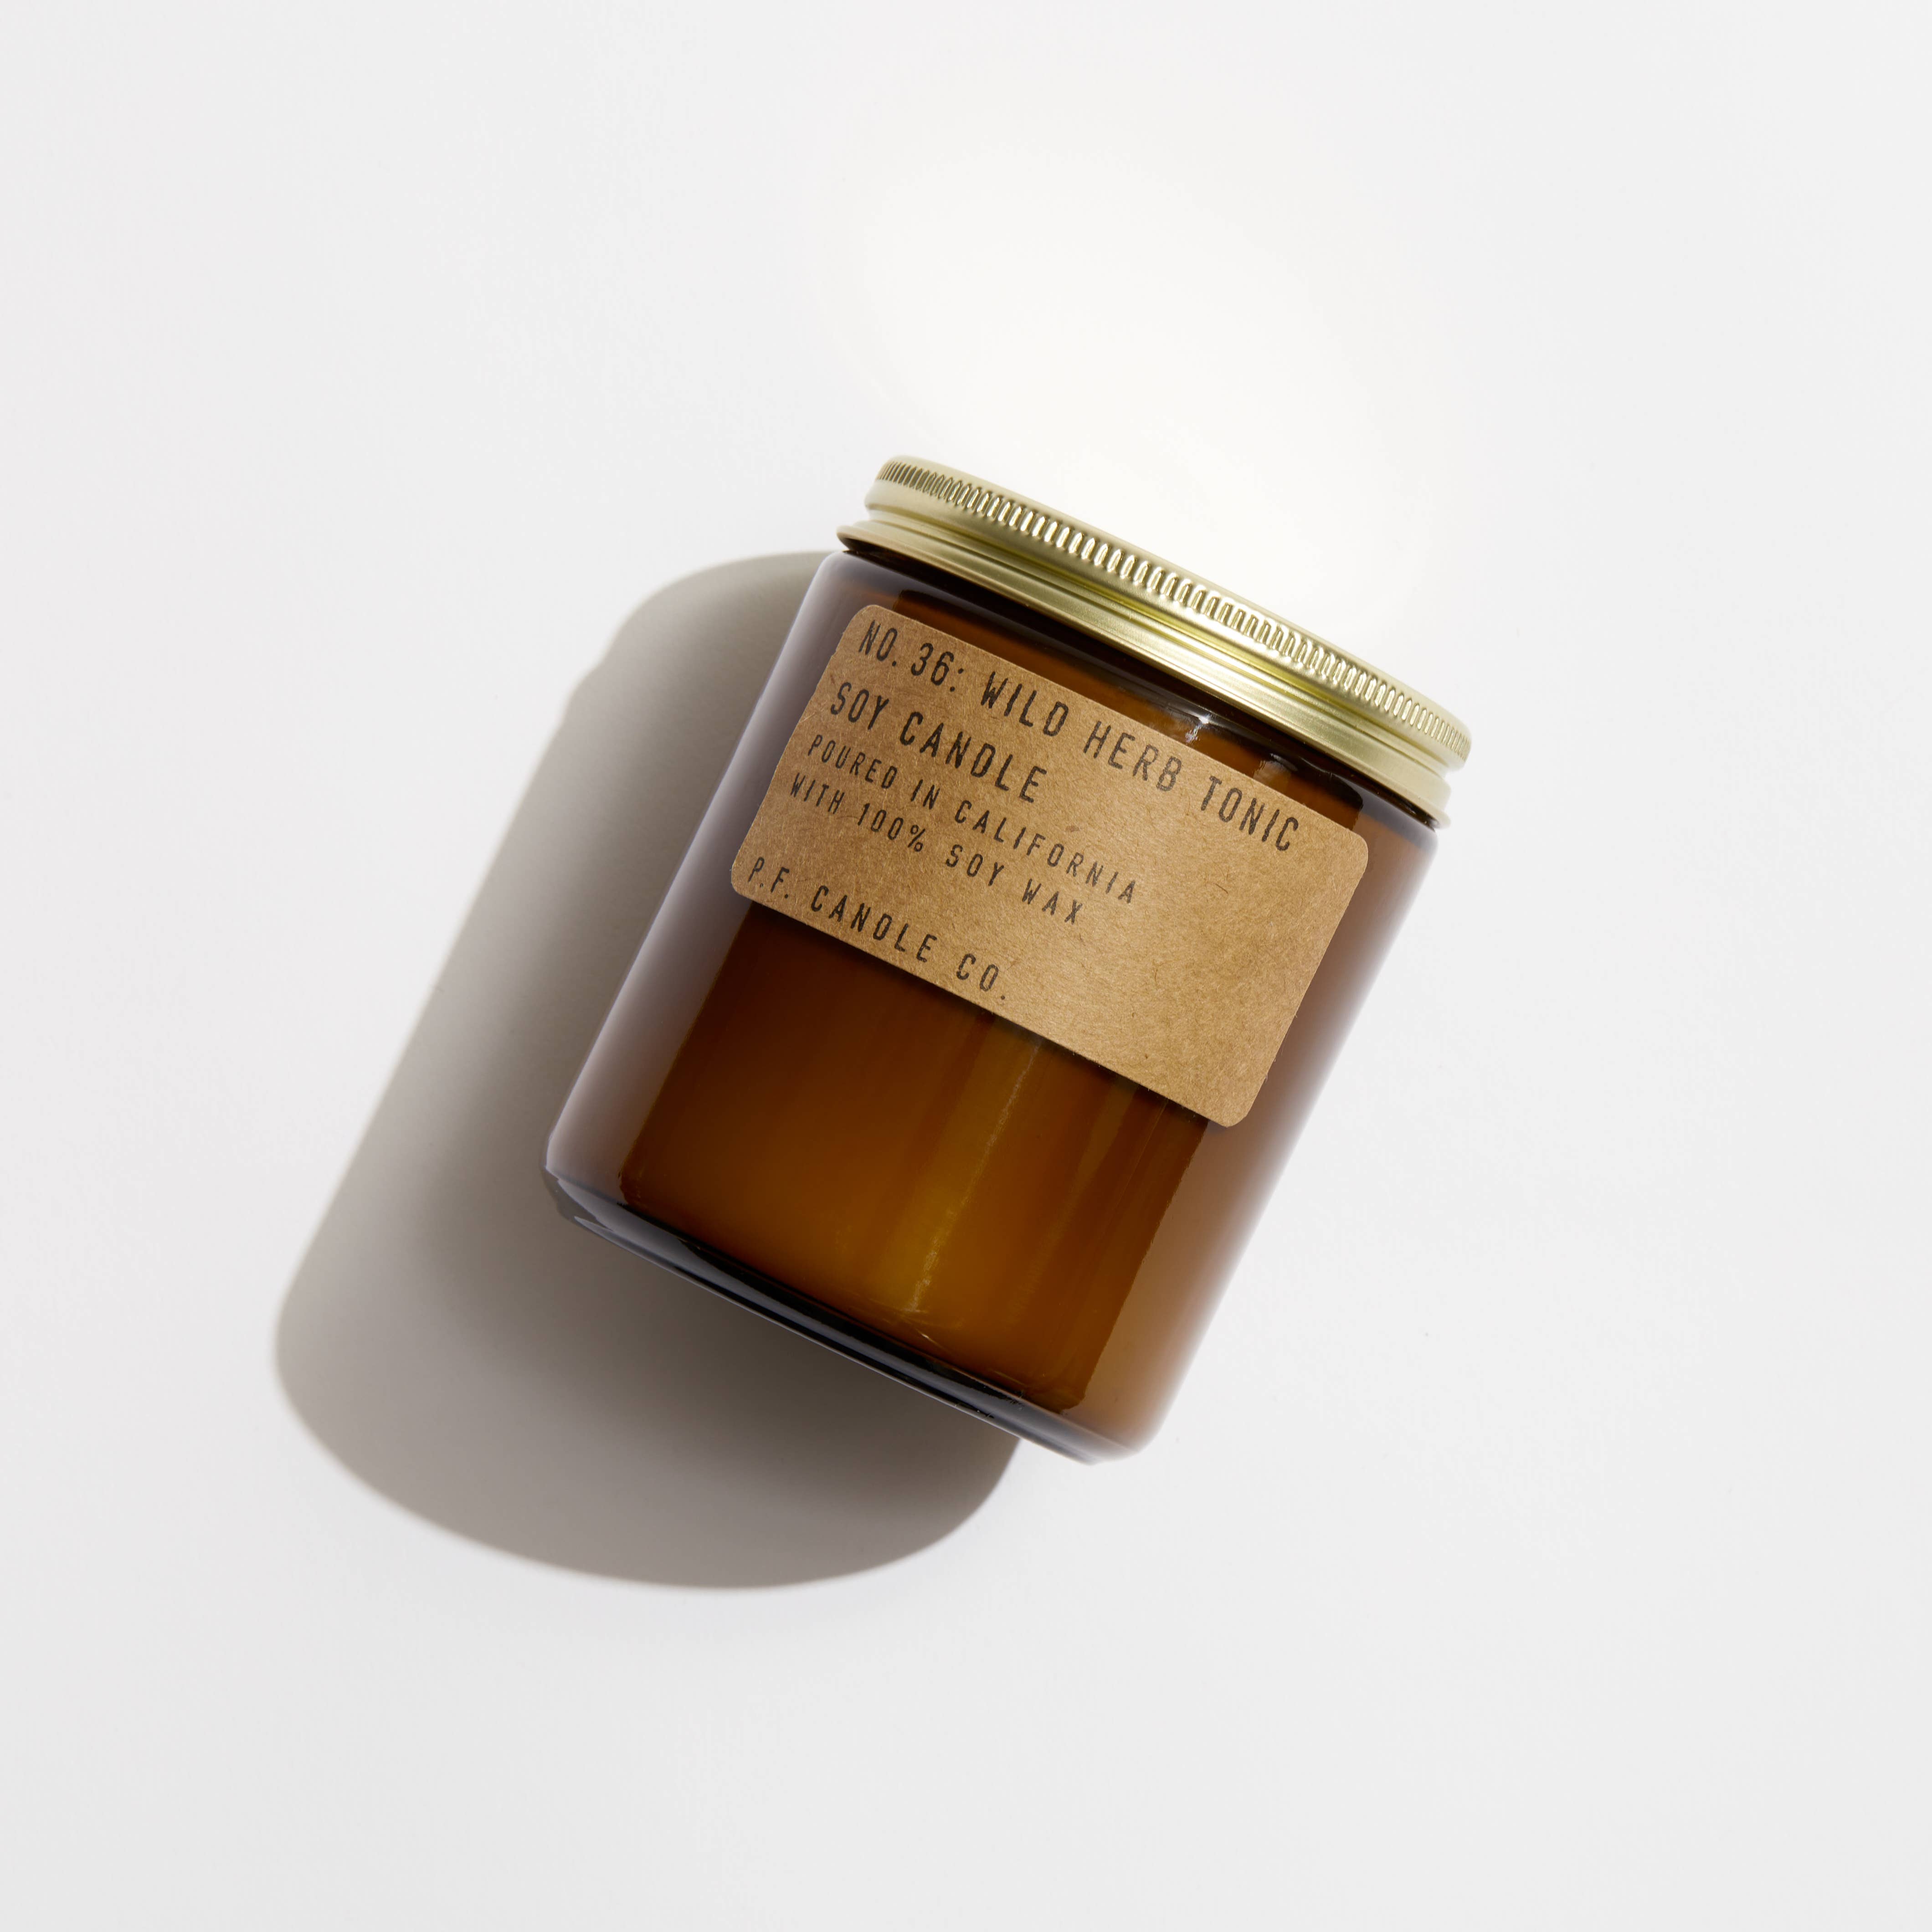 Soy Candle | Wild Herb Tonic